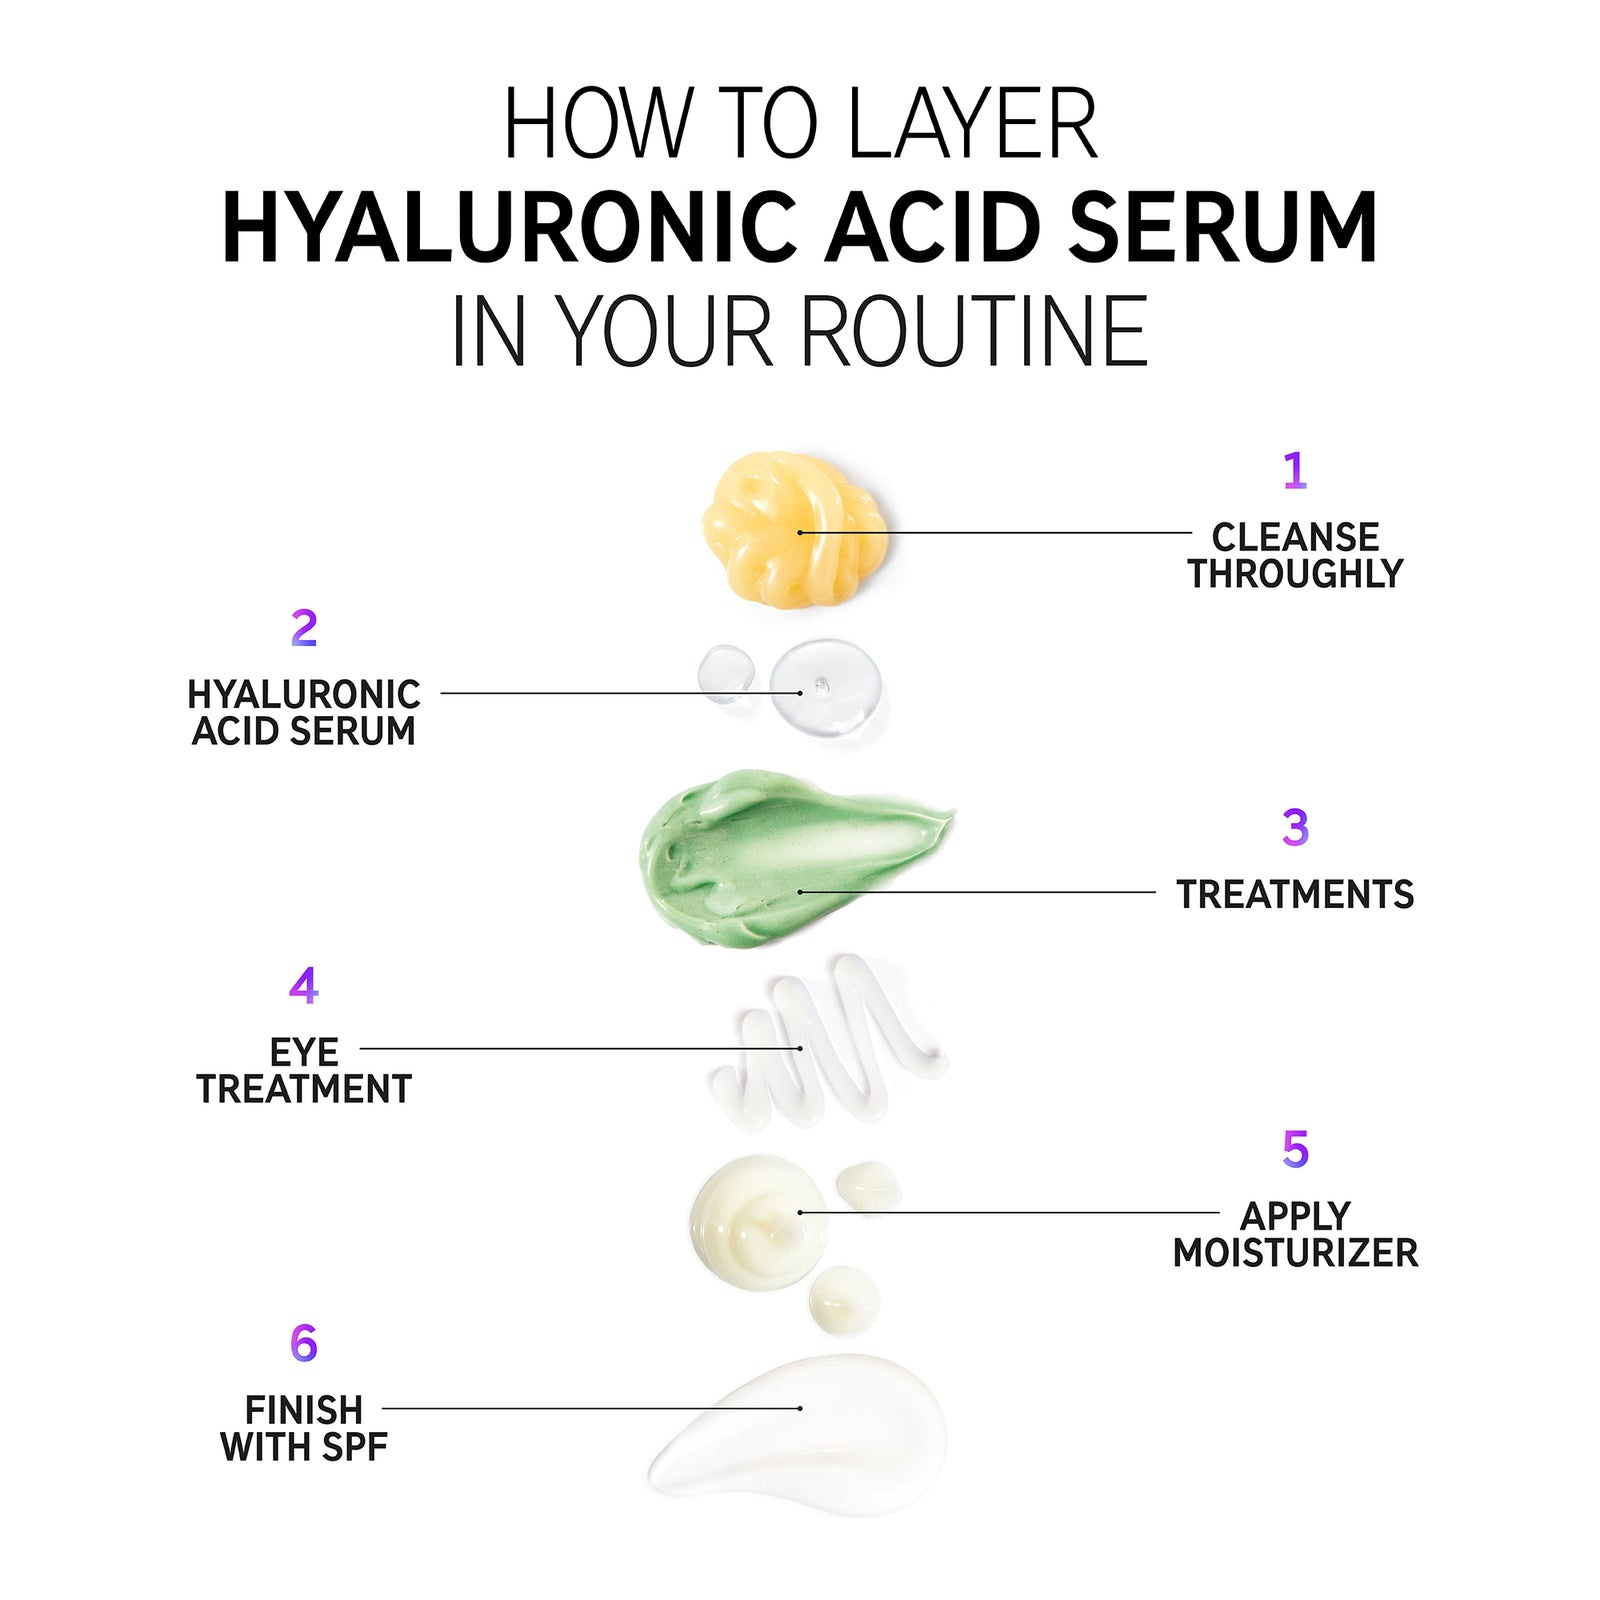 How to layer Hyaluronic Acid Serum in your routine Step 1. Cleanse thoroughly Step 2. Hyaluronic acid serum Step 3. Treatments Step 4. Eye treament Step 5. Apply moisturiser Step 6. Finish with SPF